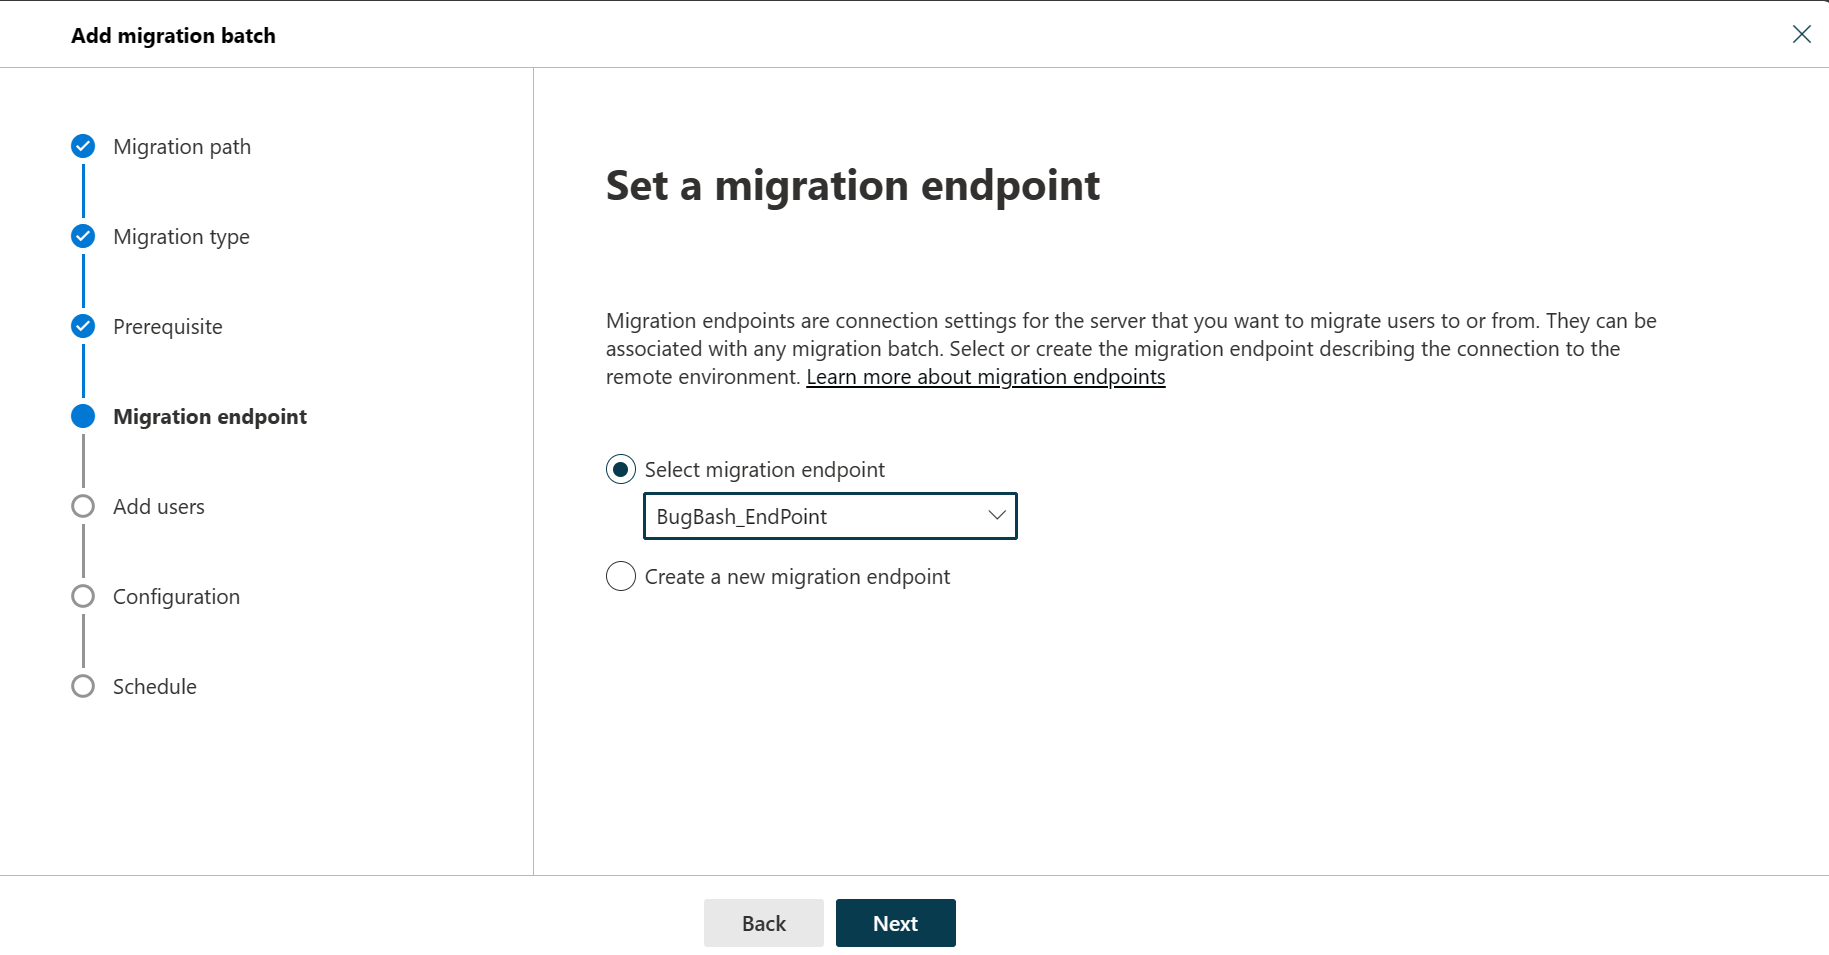 Screenshot of the fourth step of the migration batch wizard with an existing migration endpoint selected.